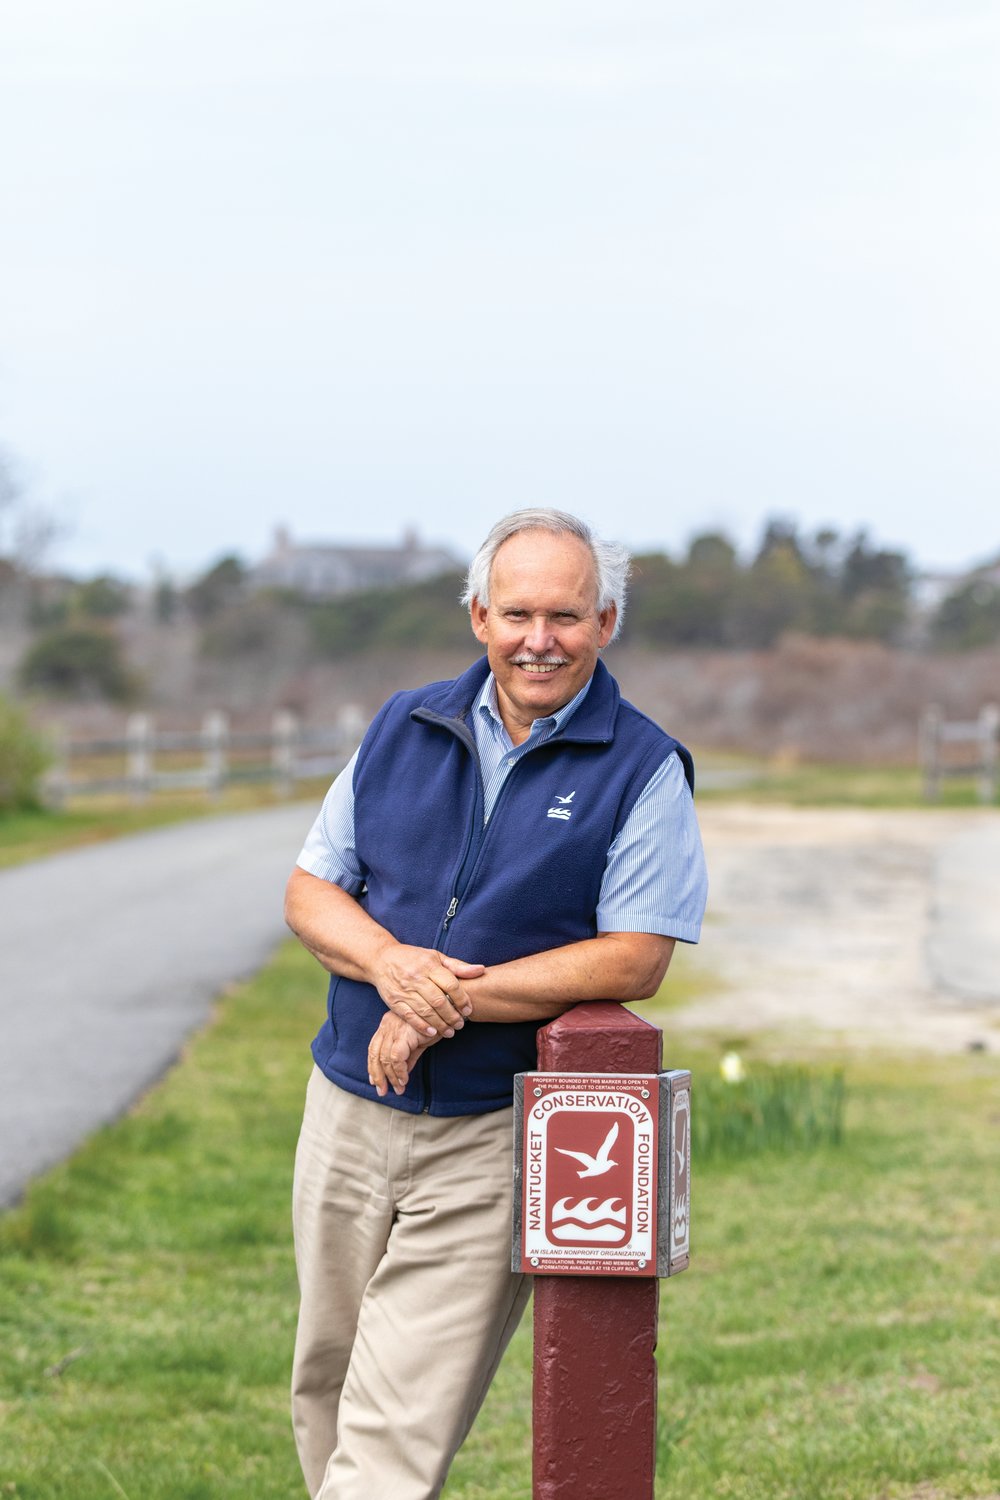 Jim Lentowski, in a portrait taken in June 2018 shortly before his retirement after 47 years as executive director of the Nantucket Conservation Foundation.